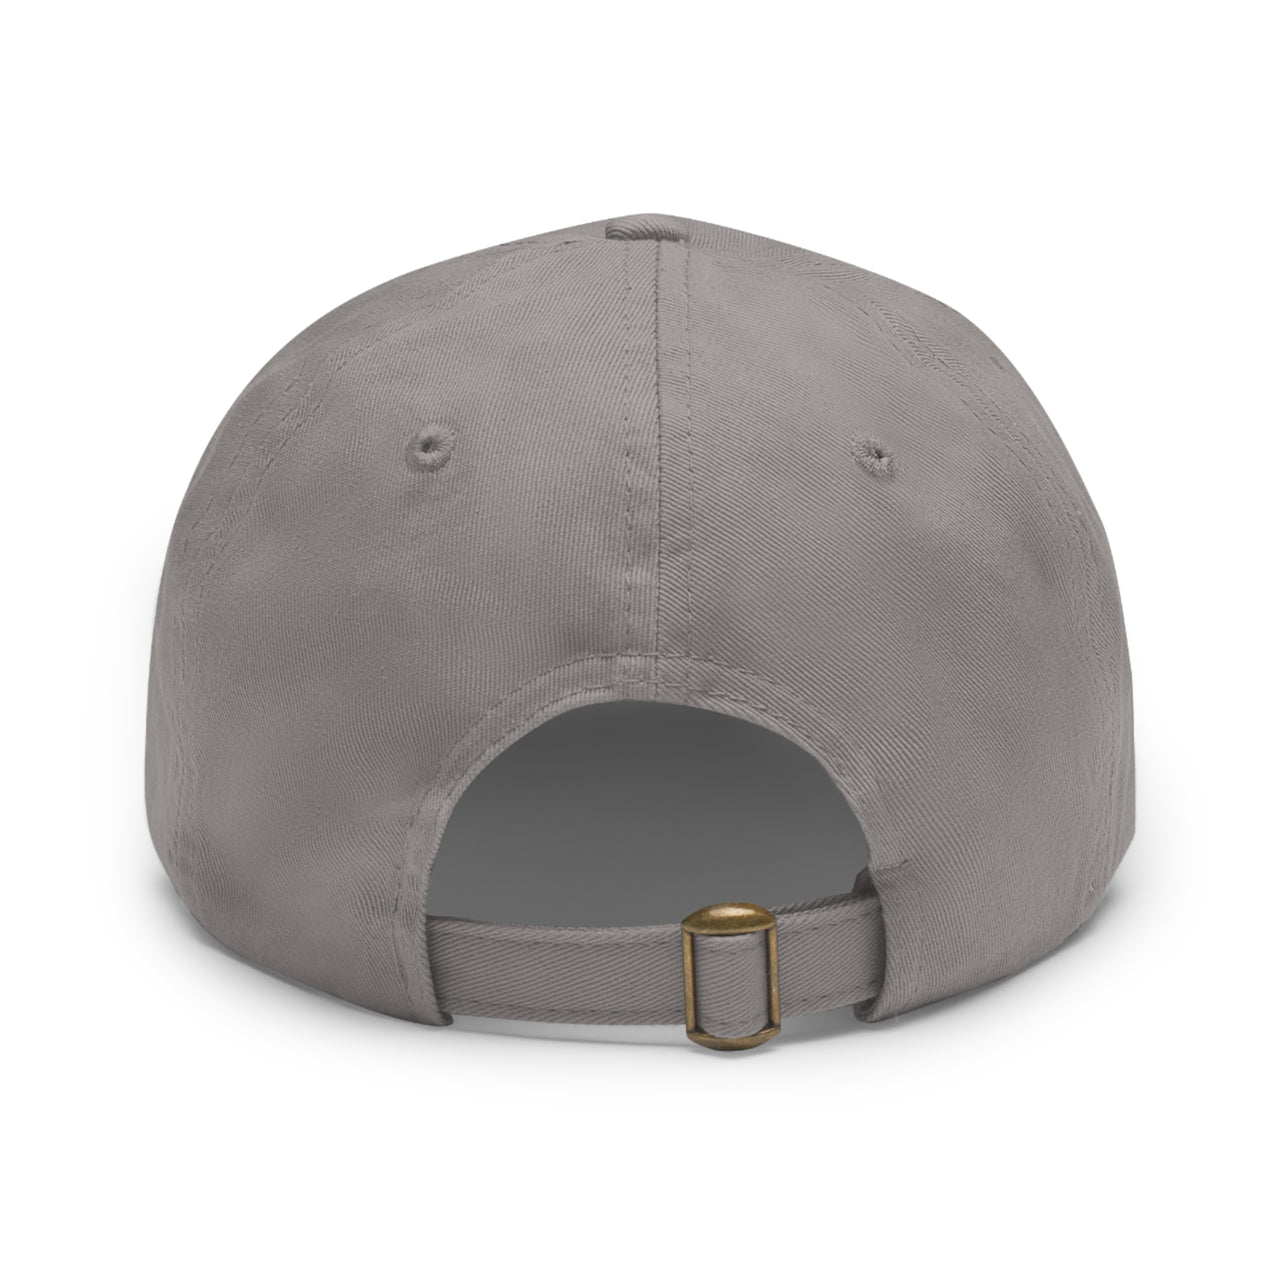 Benfica Dad Hat with Leather Patch (Round)